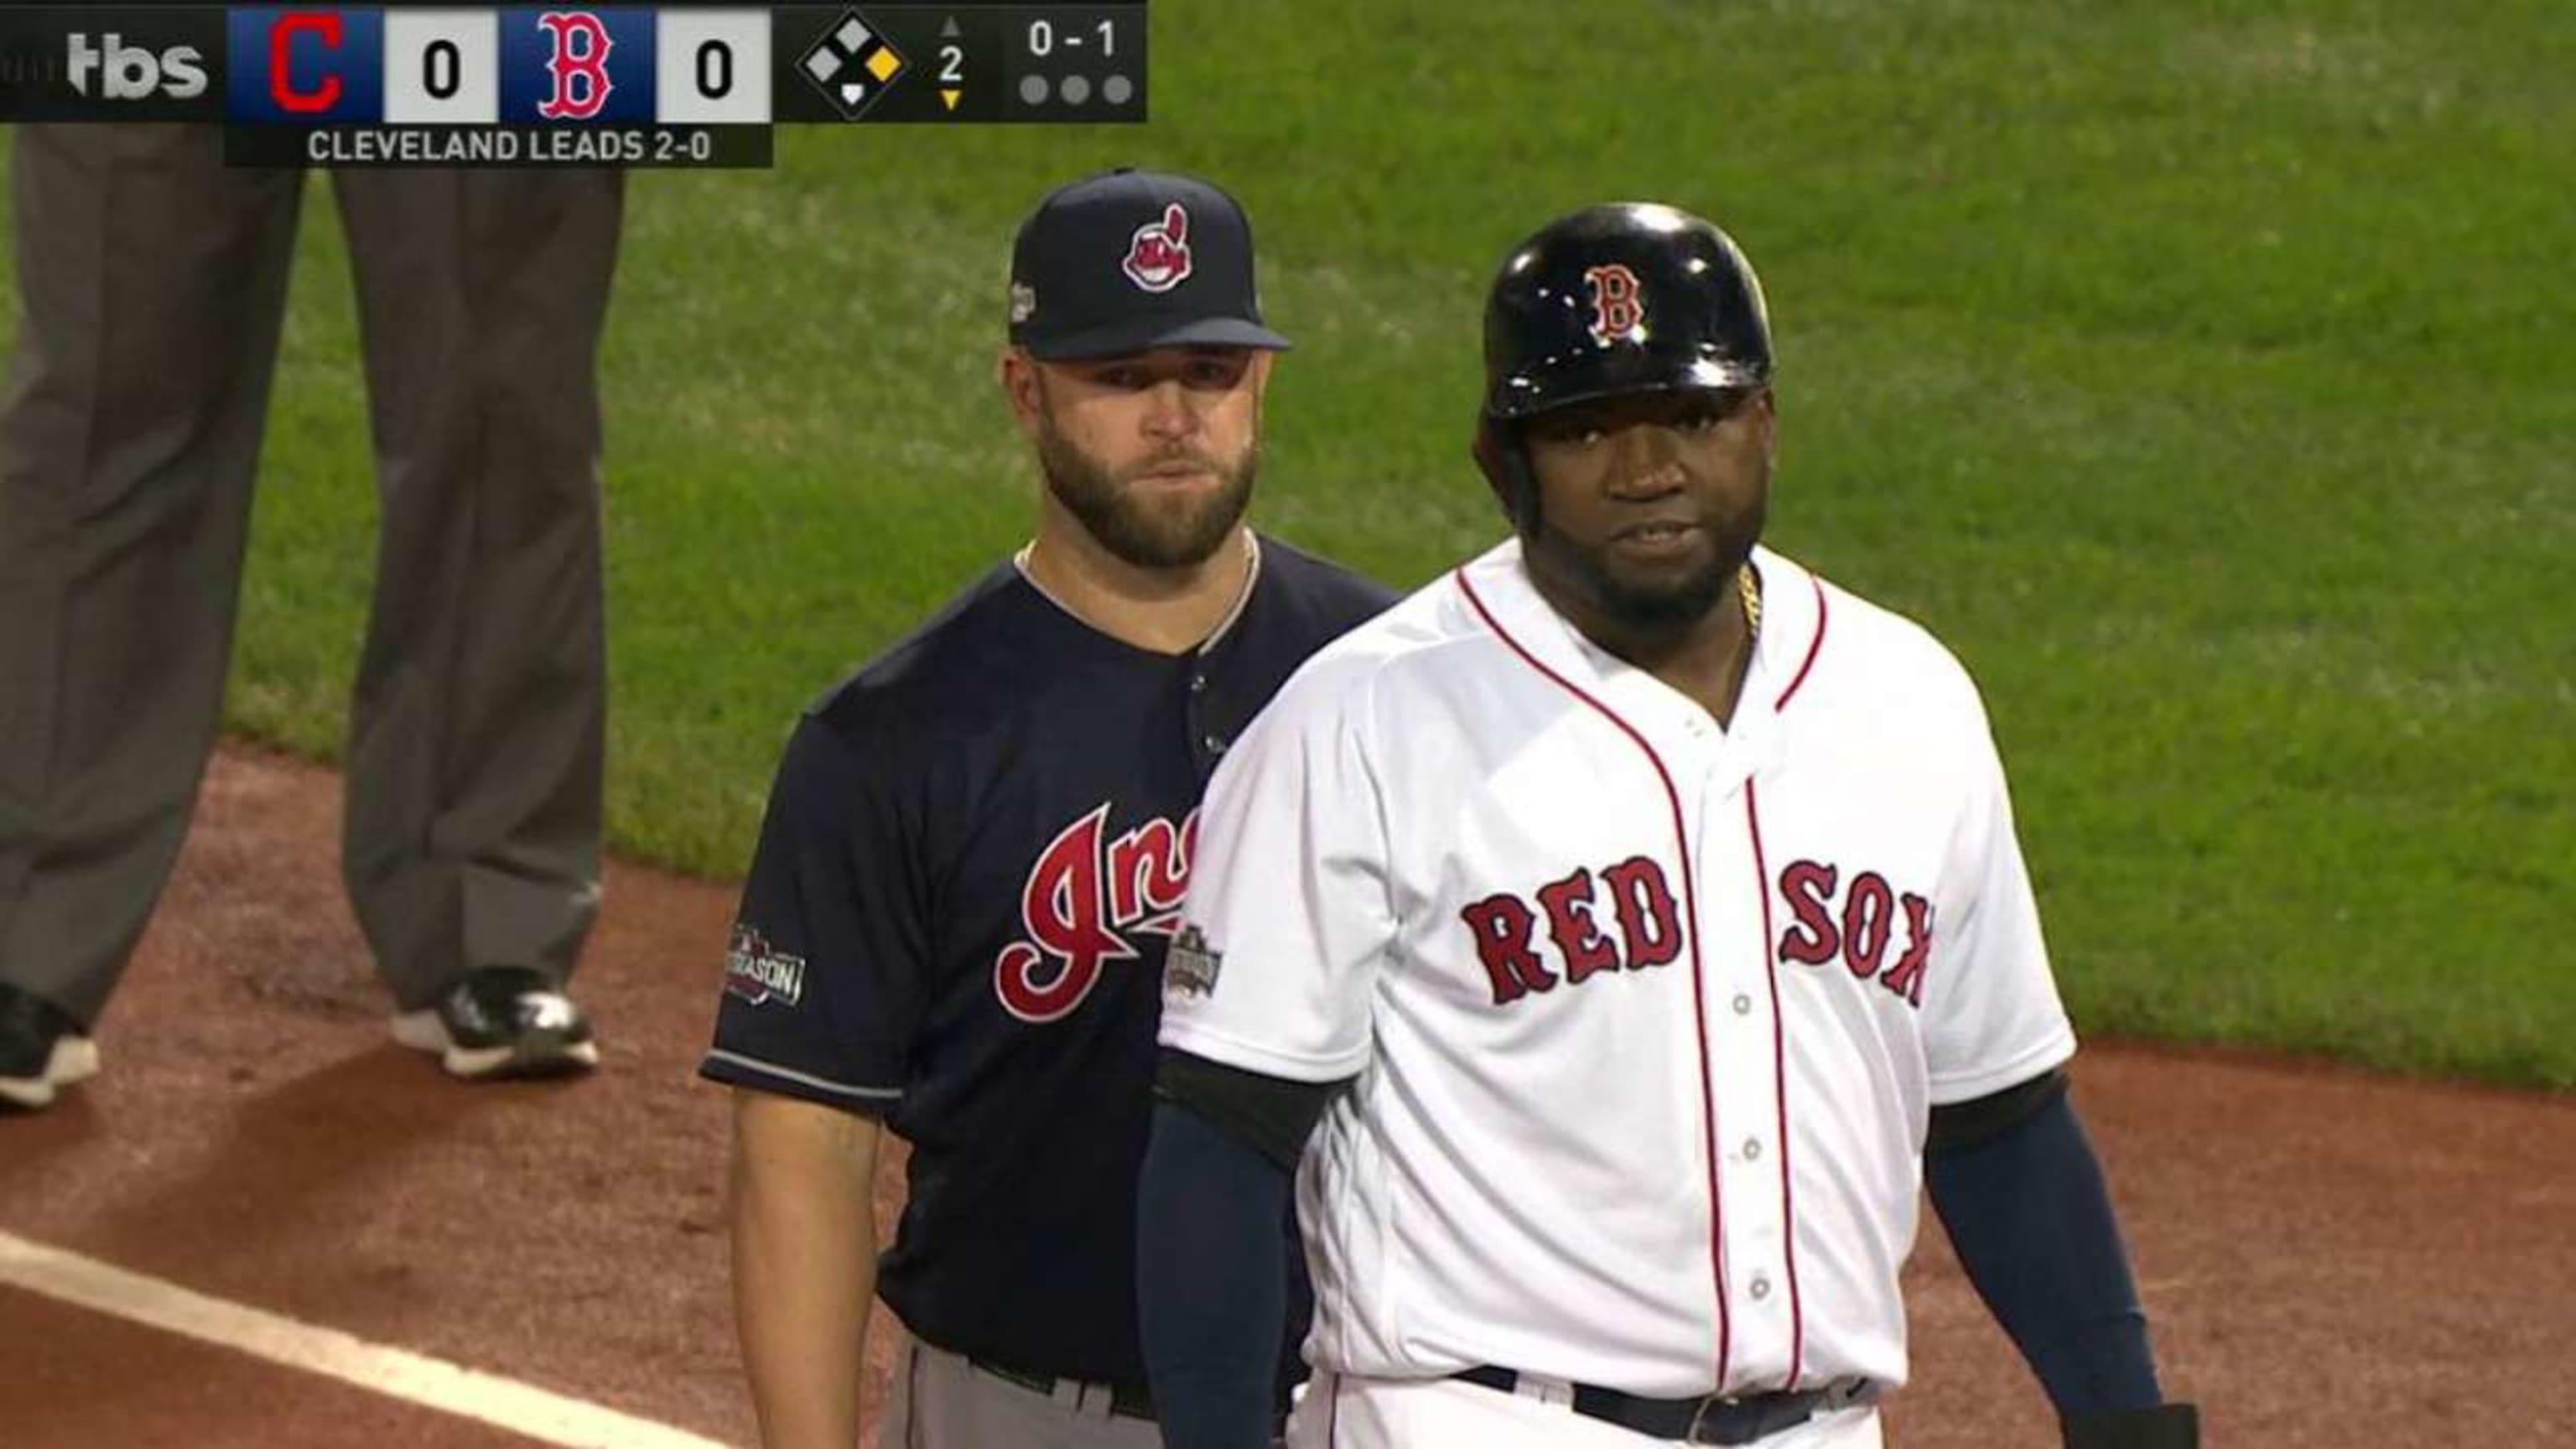 Mike Napoli greeted former teammate David Ortiz with a quick